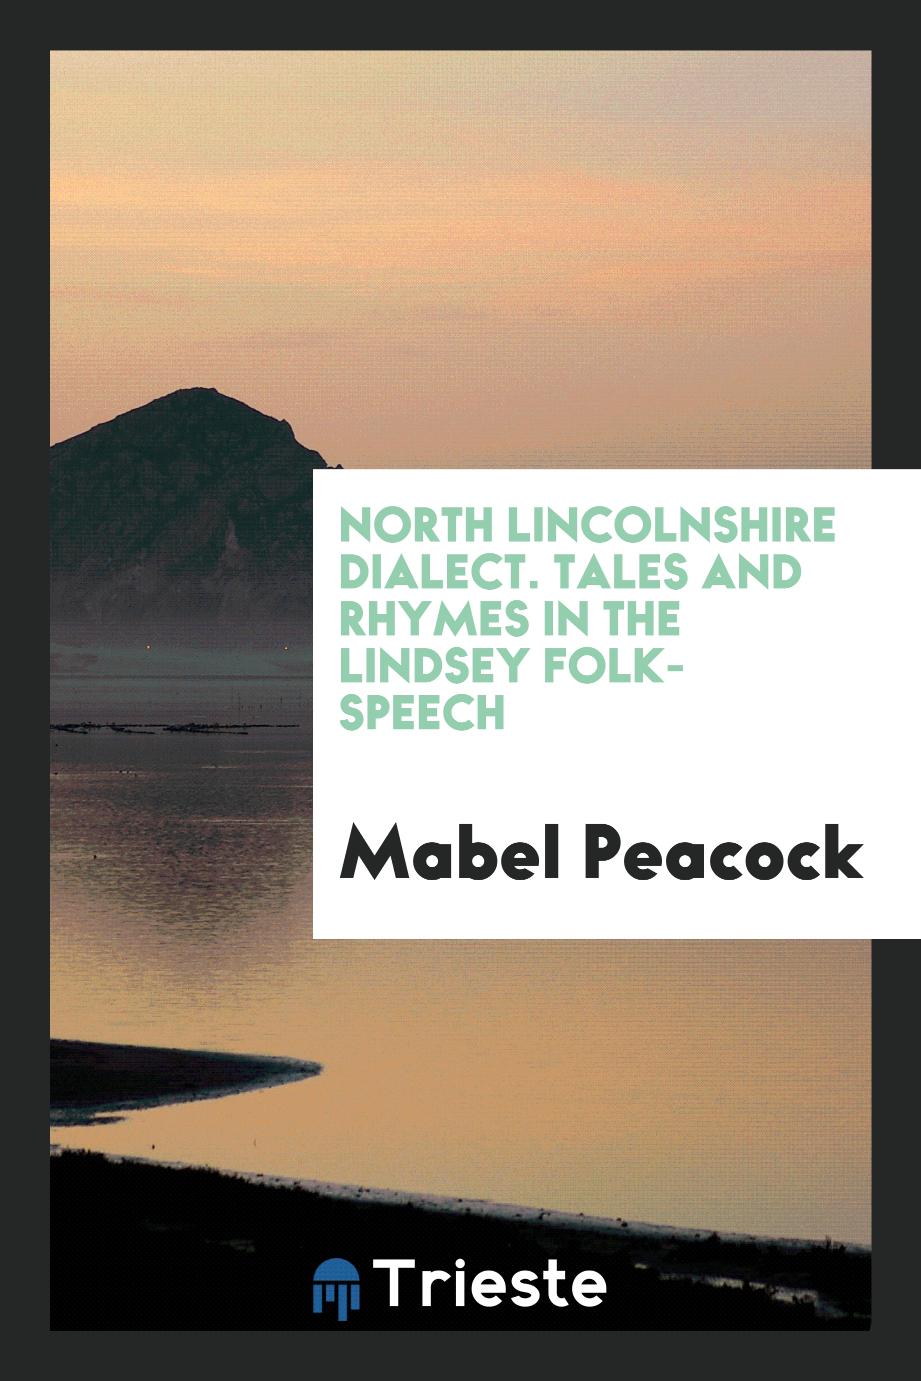 North Lincolnshire Dialect. Tales and Rhymes in the Lindsey Folk-Speech